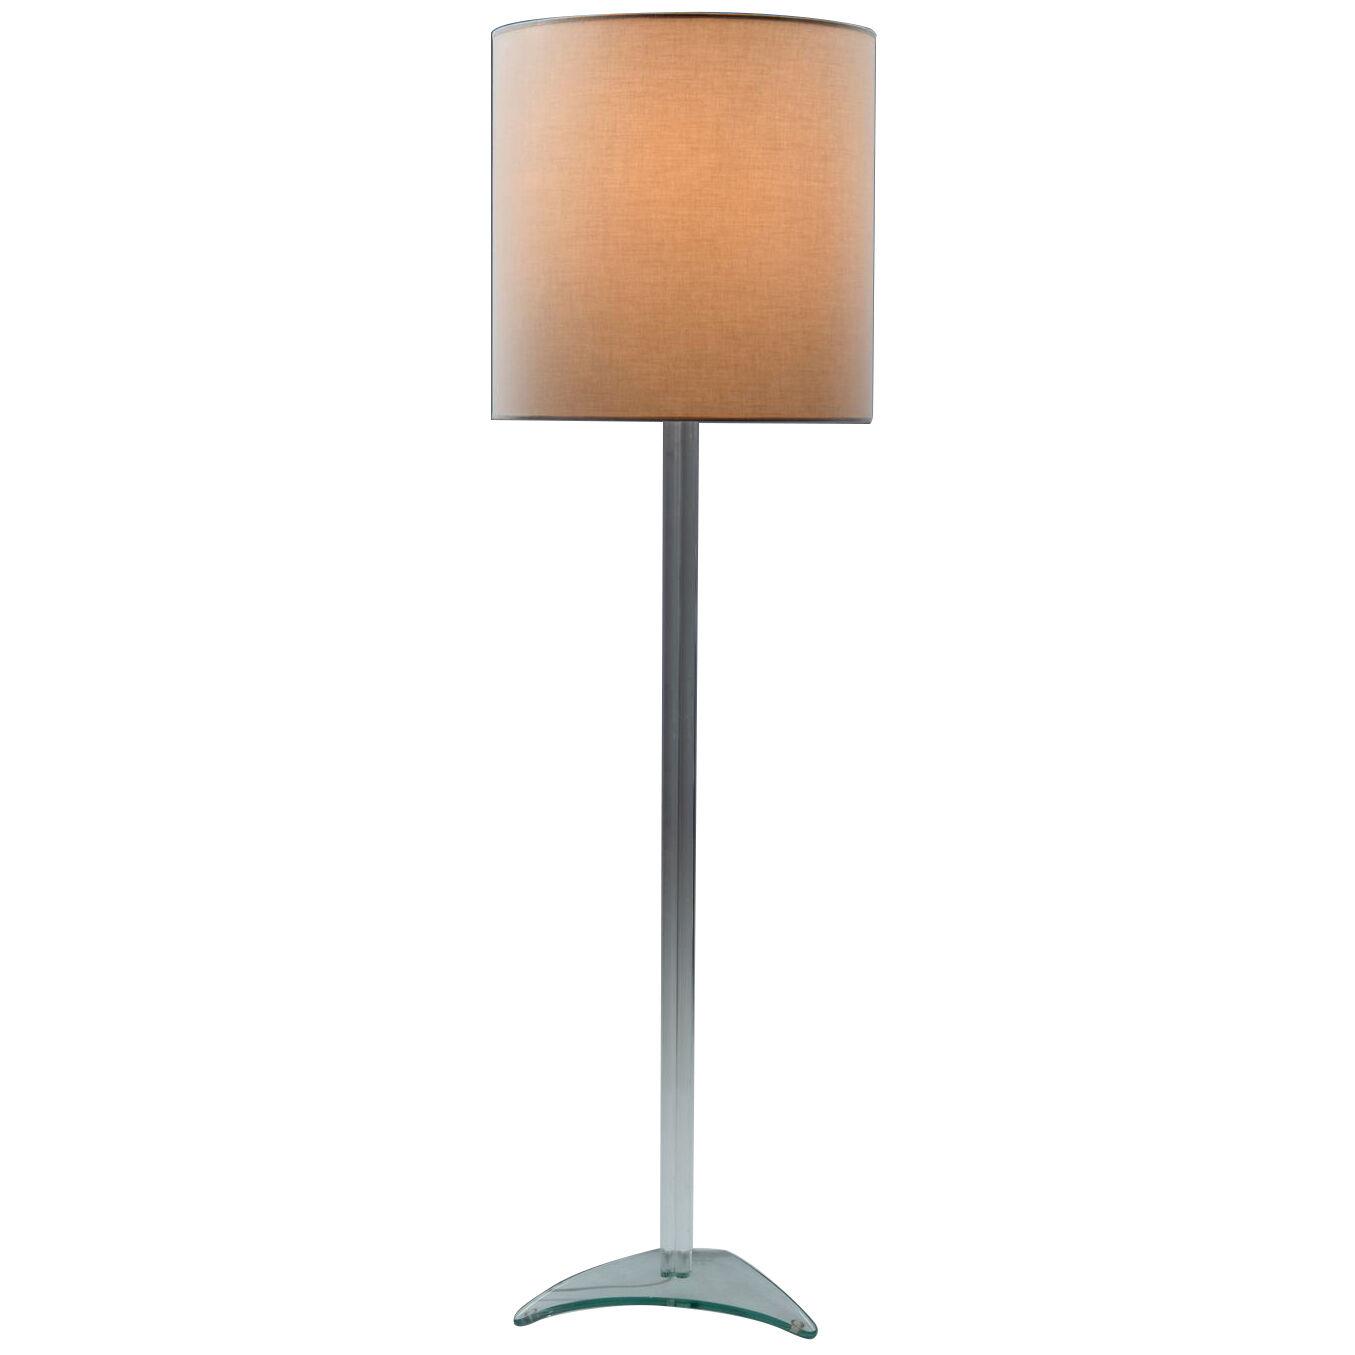 Floor lamp with a glass stem, 1980's